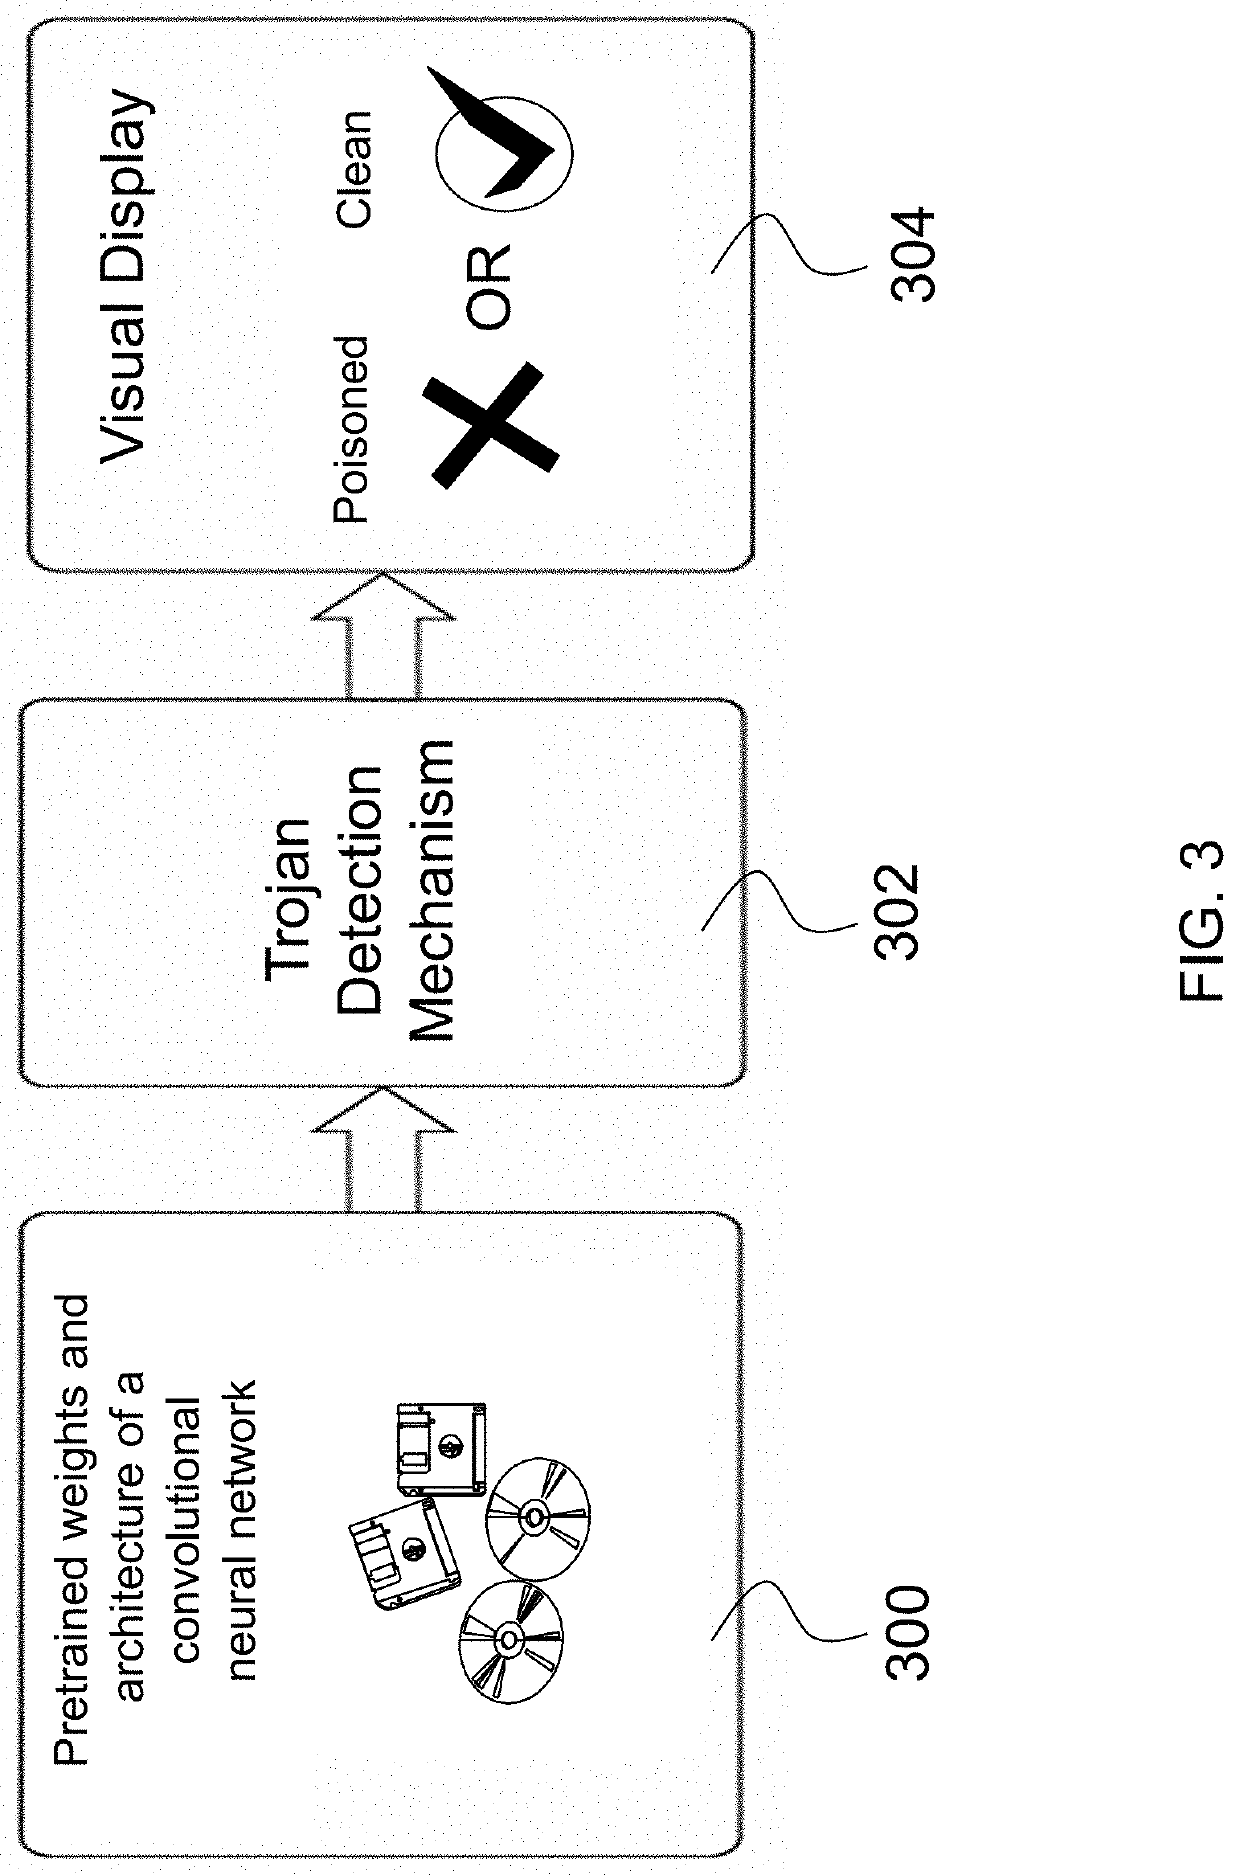 System and method for detecting backdoor attacks in convolutional neural networks